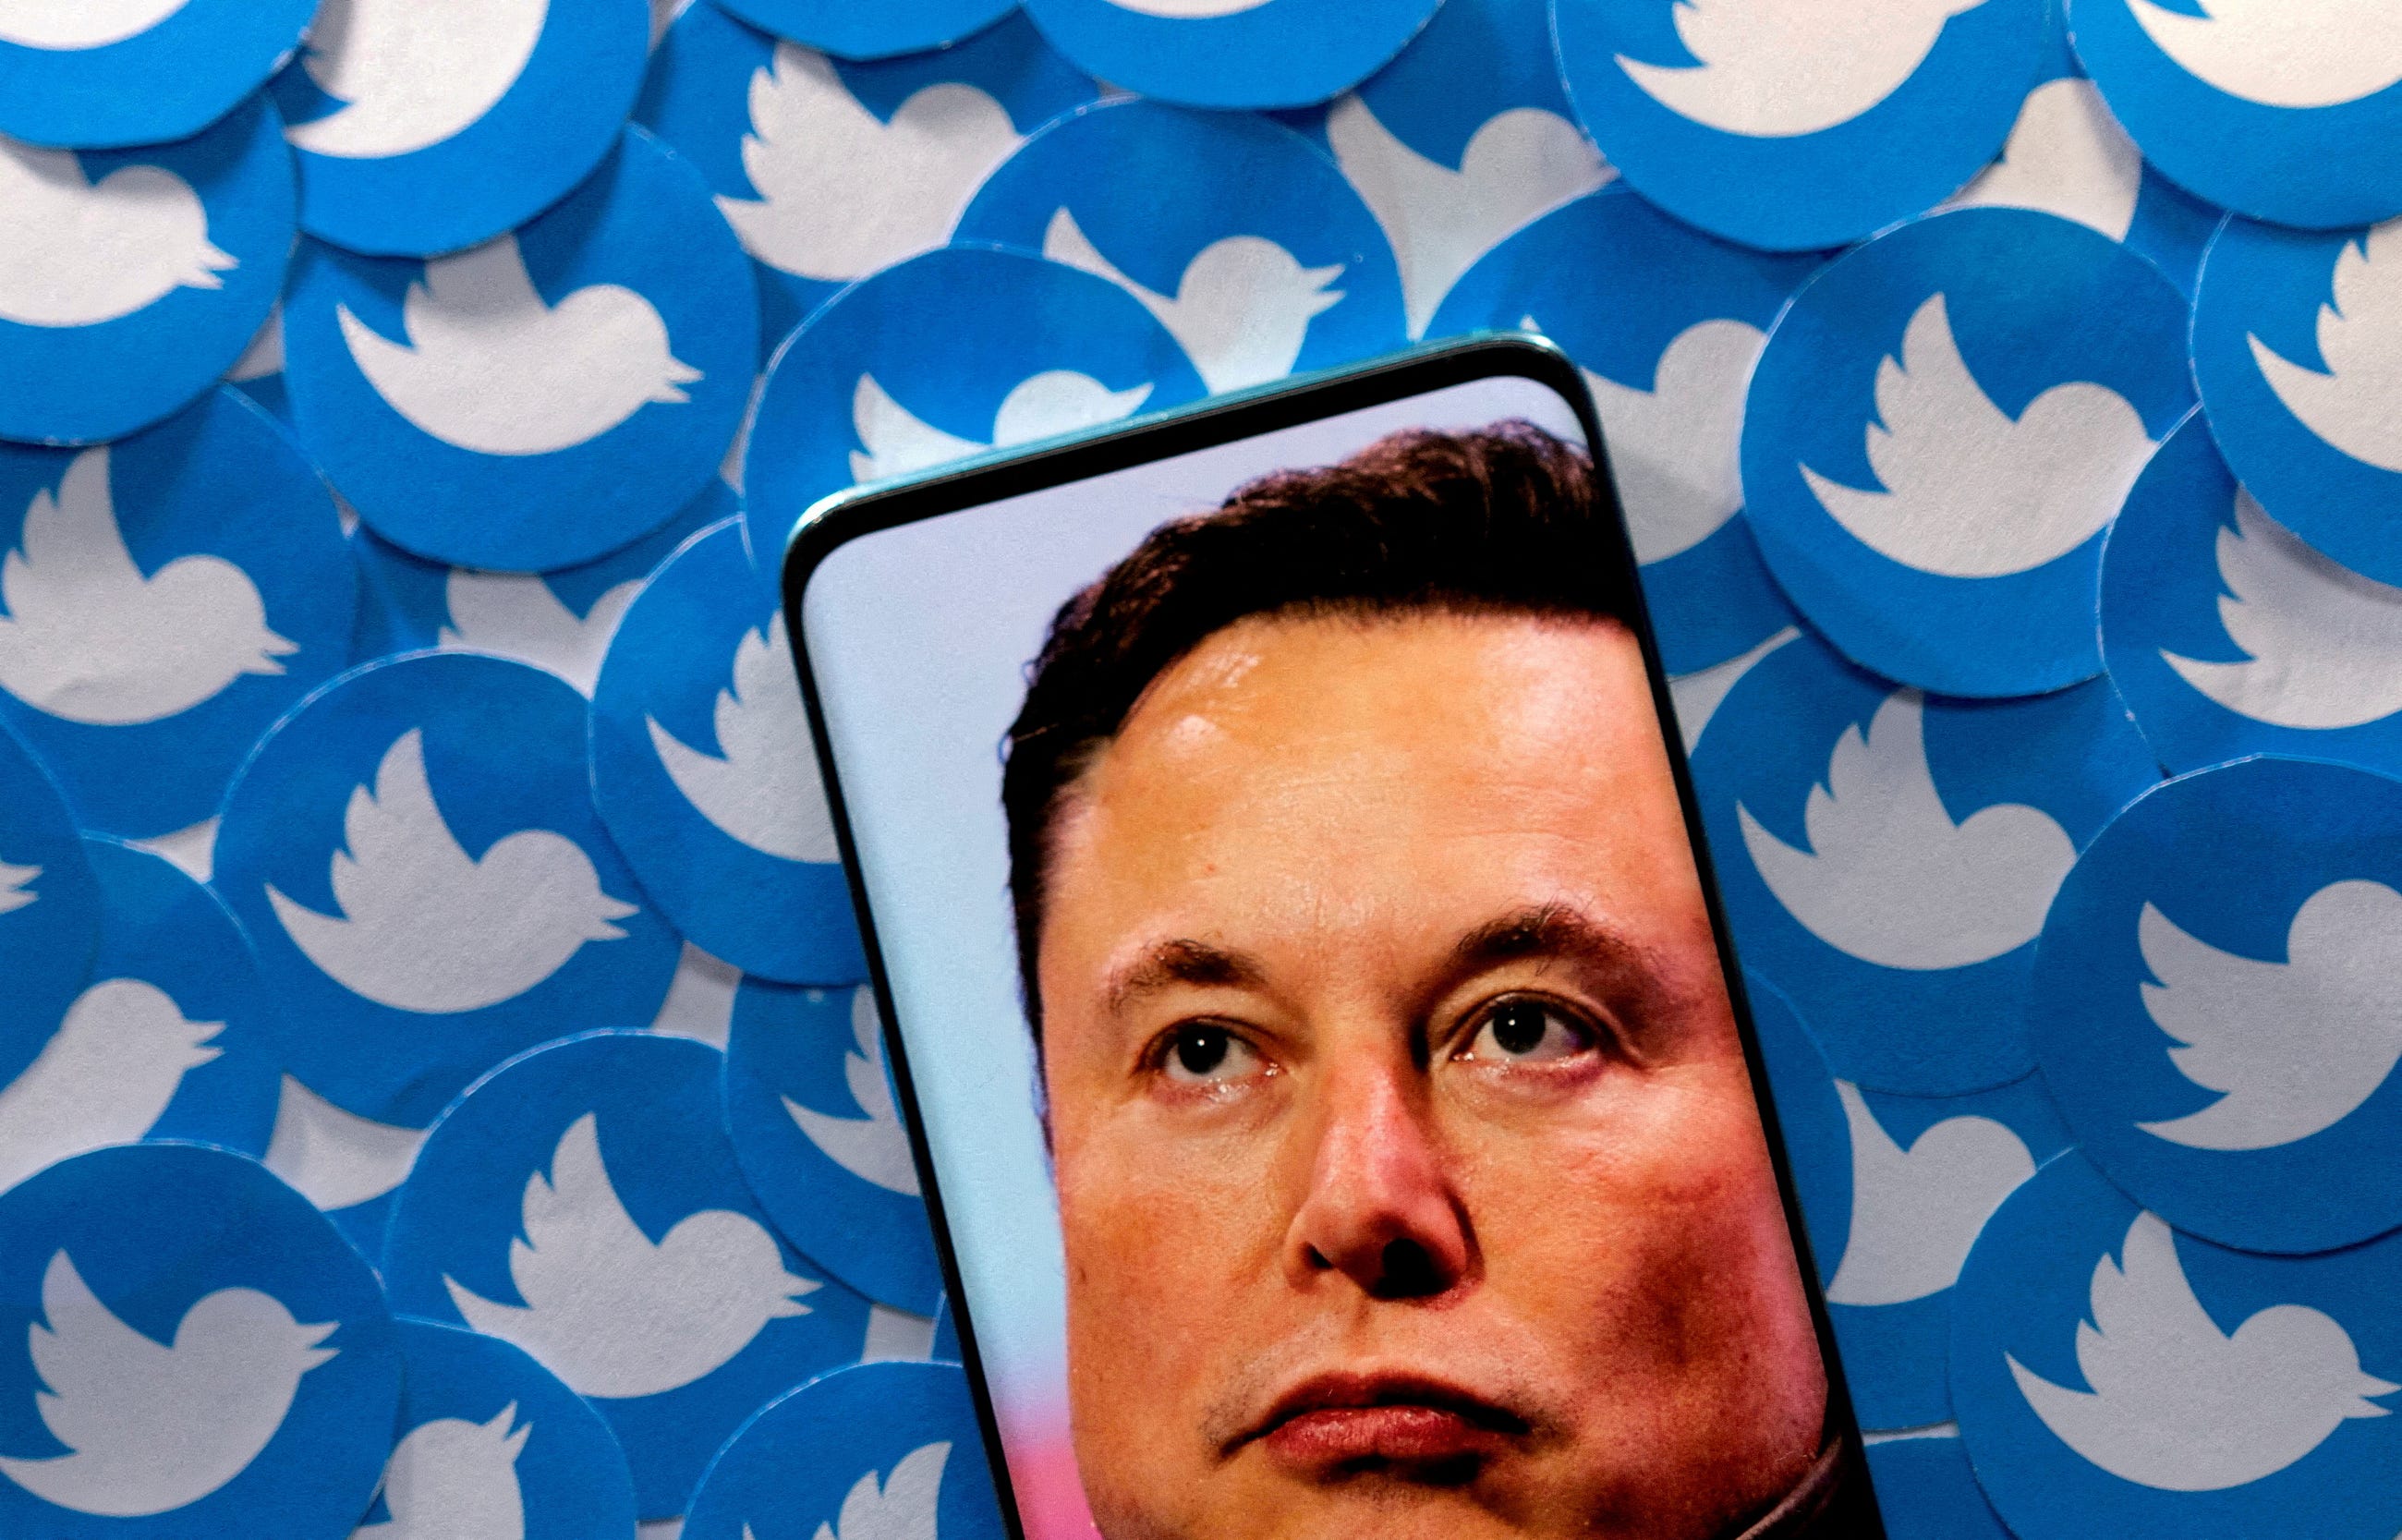 3 Reasons Content Creators Should Go All In On Elon Musk’s Twitter 2.0